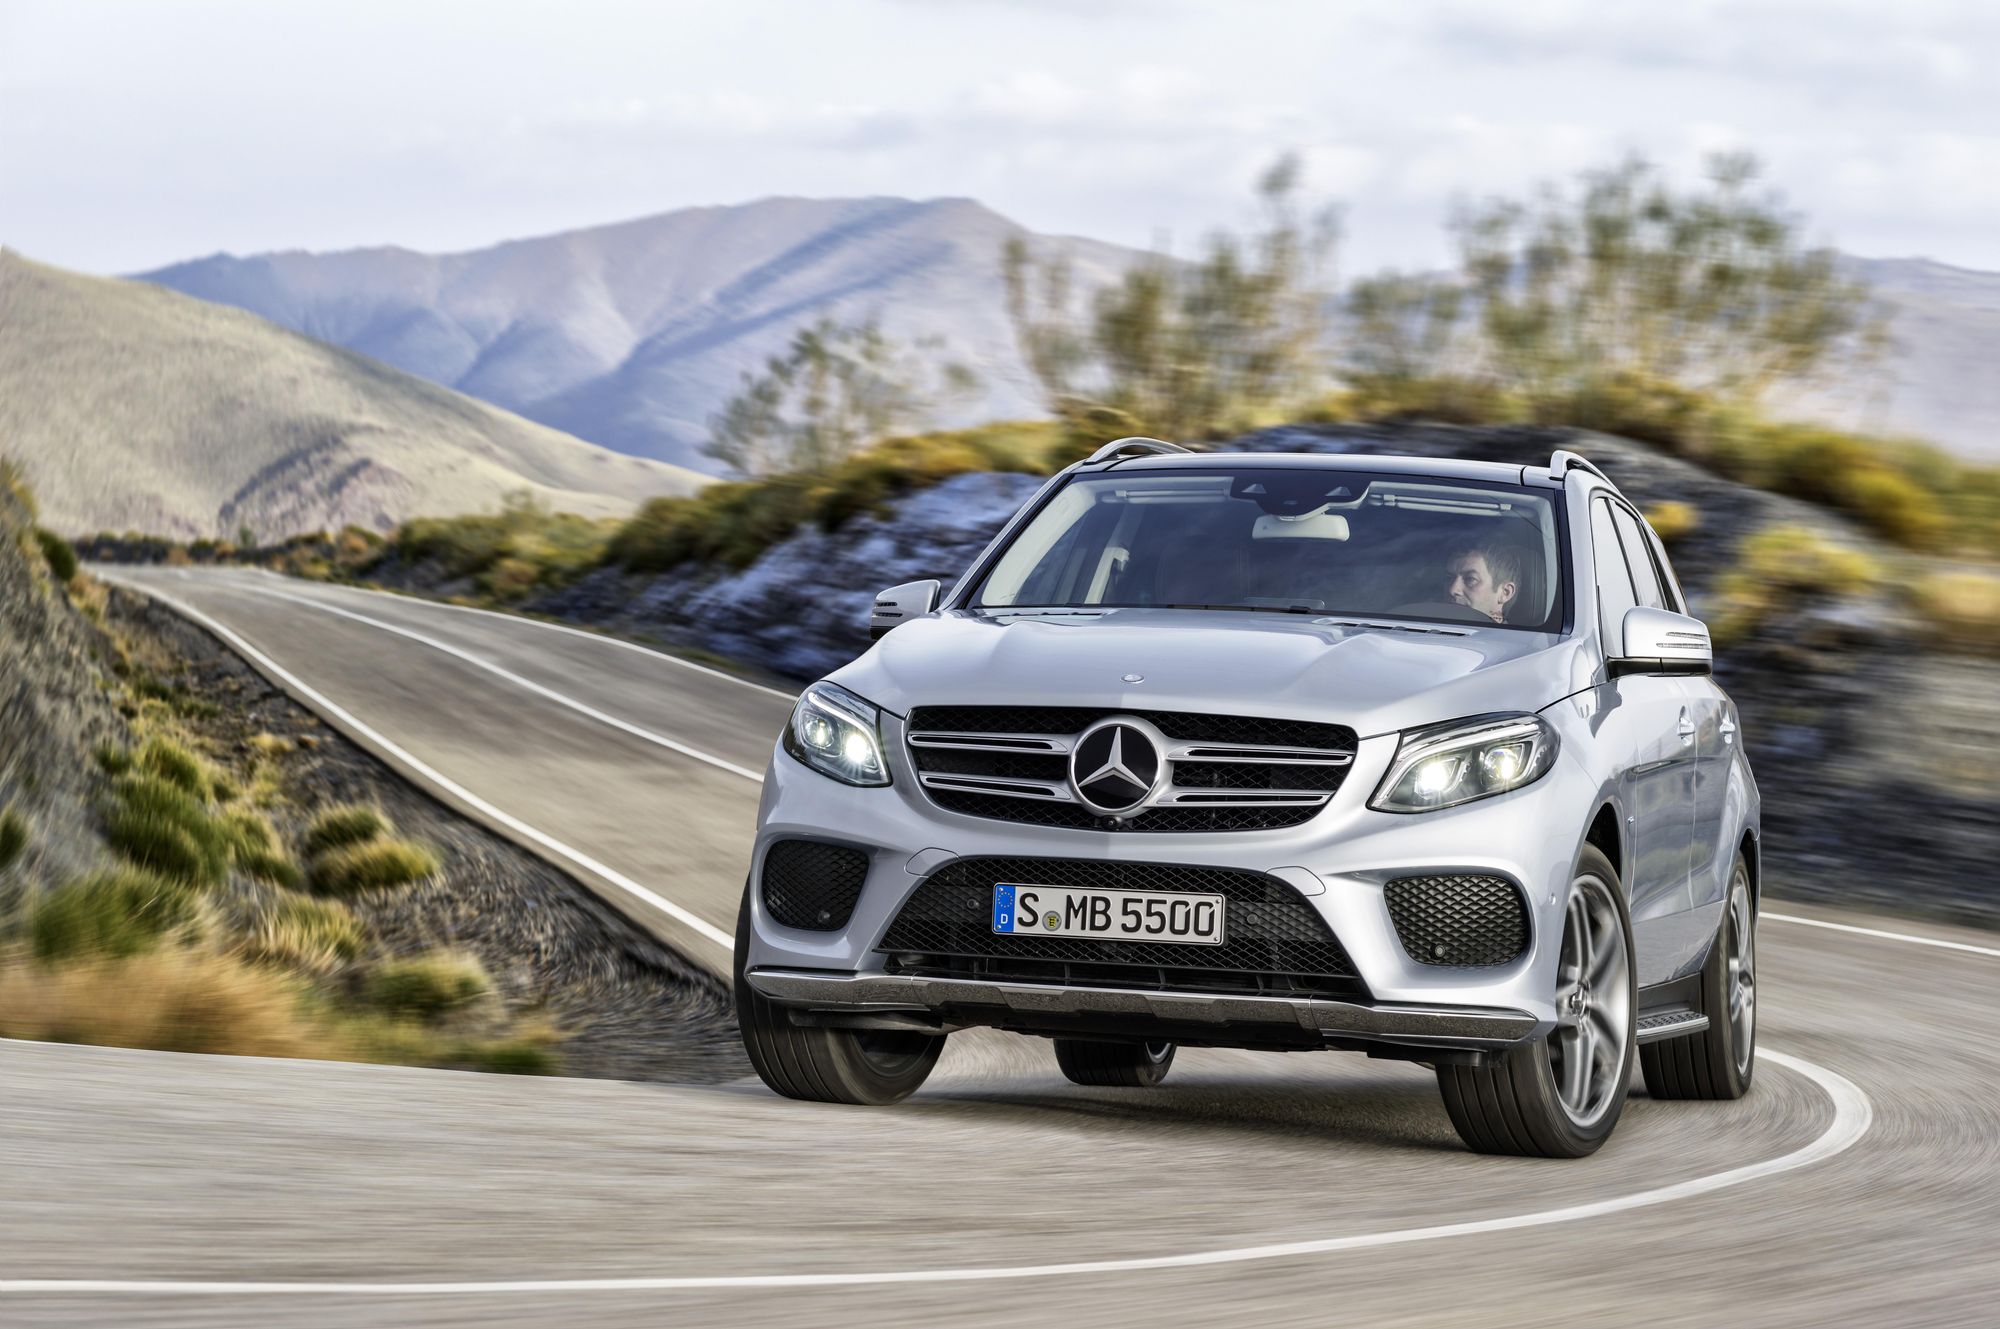 2018 Mercedes Benz GLE 550e 4MATIC Plug-In Hybrid: A safe, sumptuous SUV |  Gaywheels